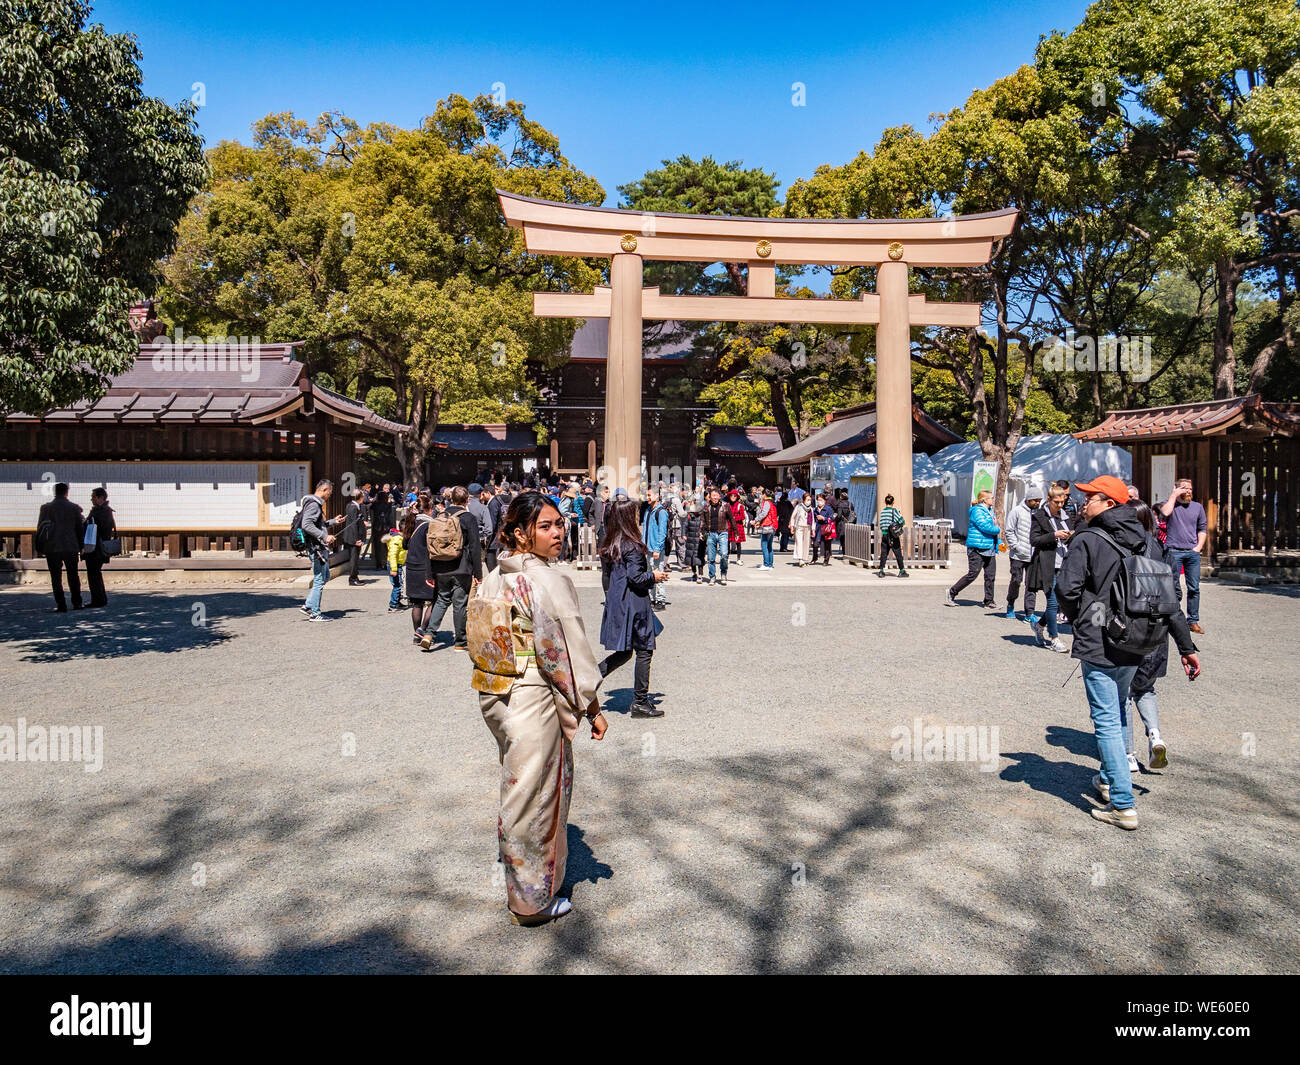 24 March 2019: Tokyo, Japan - Visitors approaching the gate of the Meiji Jingu shrine in Tokyo. Stock Photo